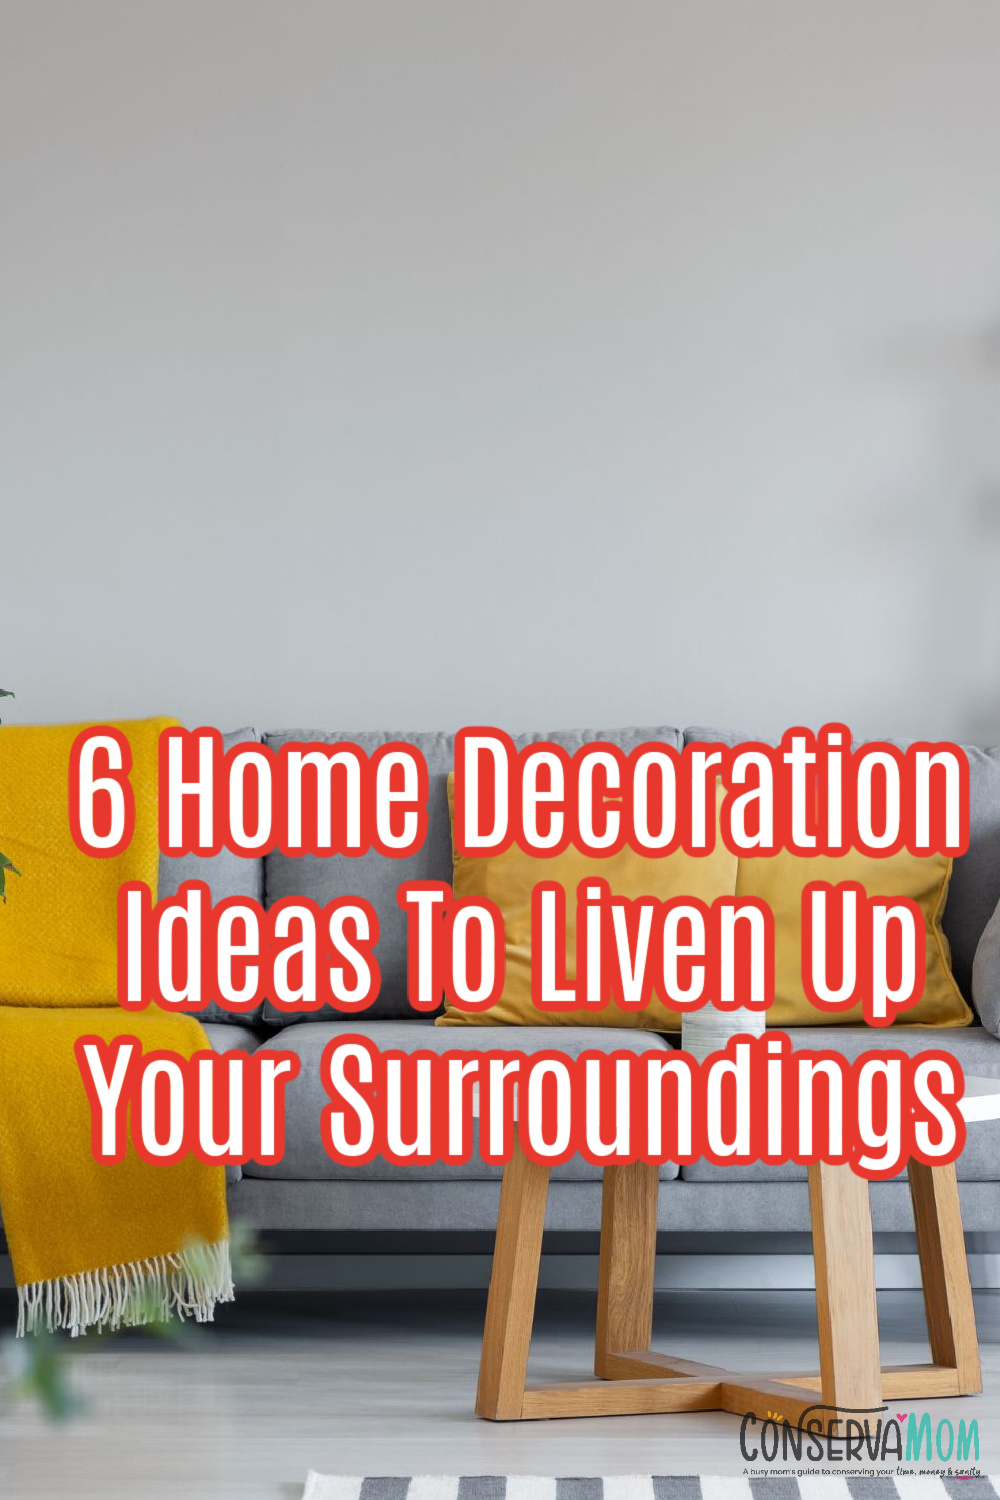 6 Home Decoration Ideas To Liven Up Your Surroundings